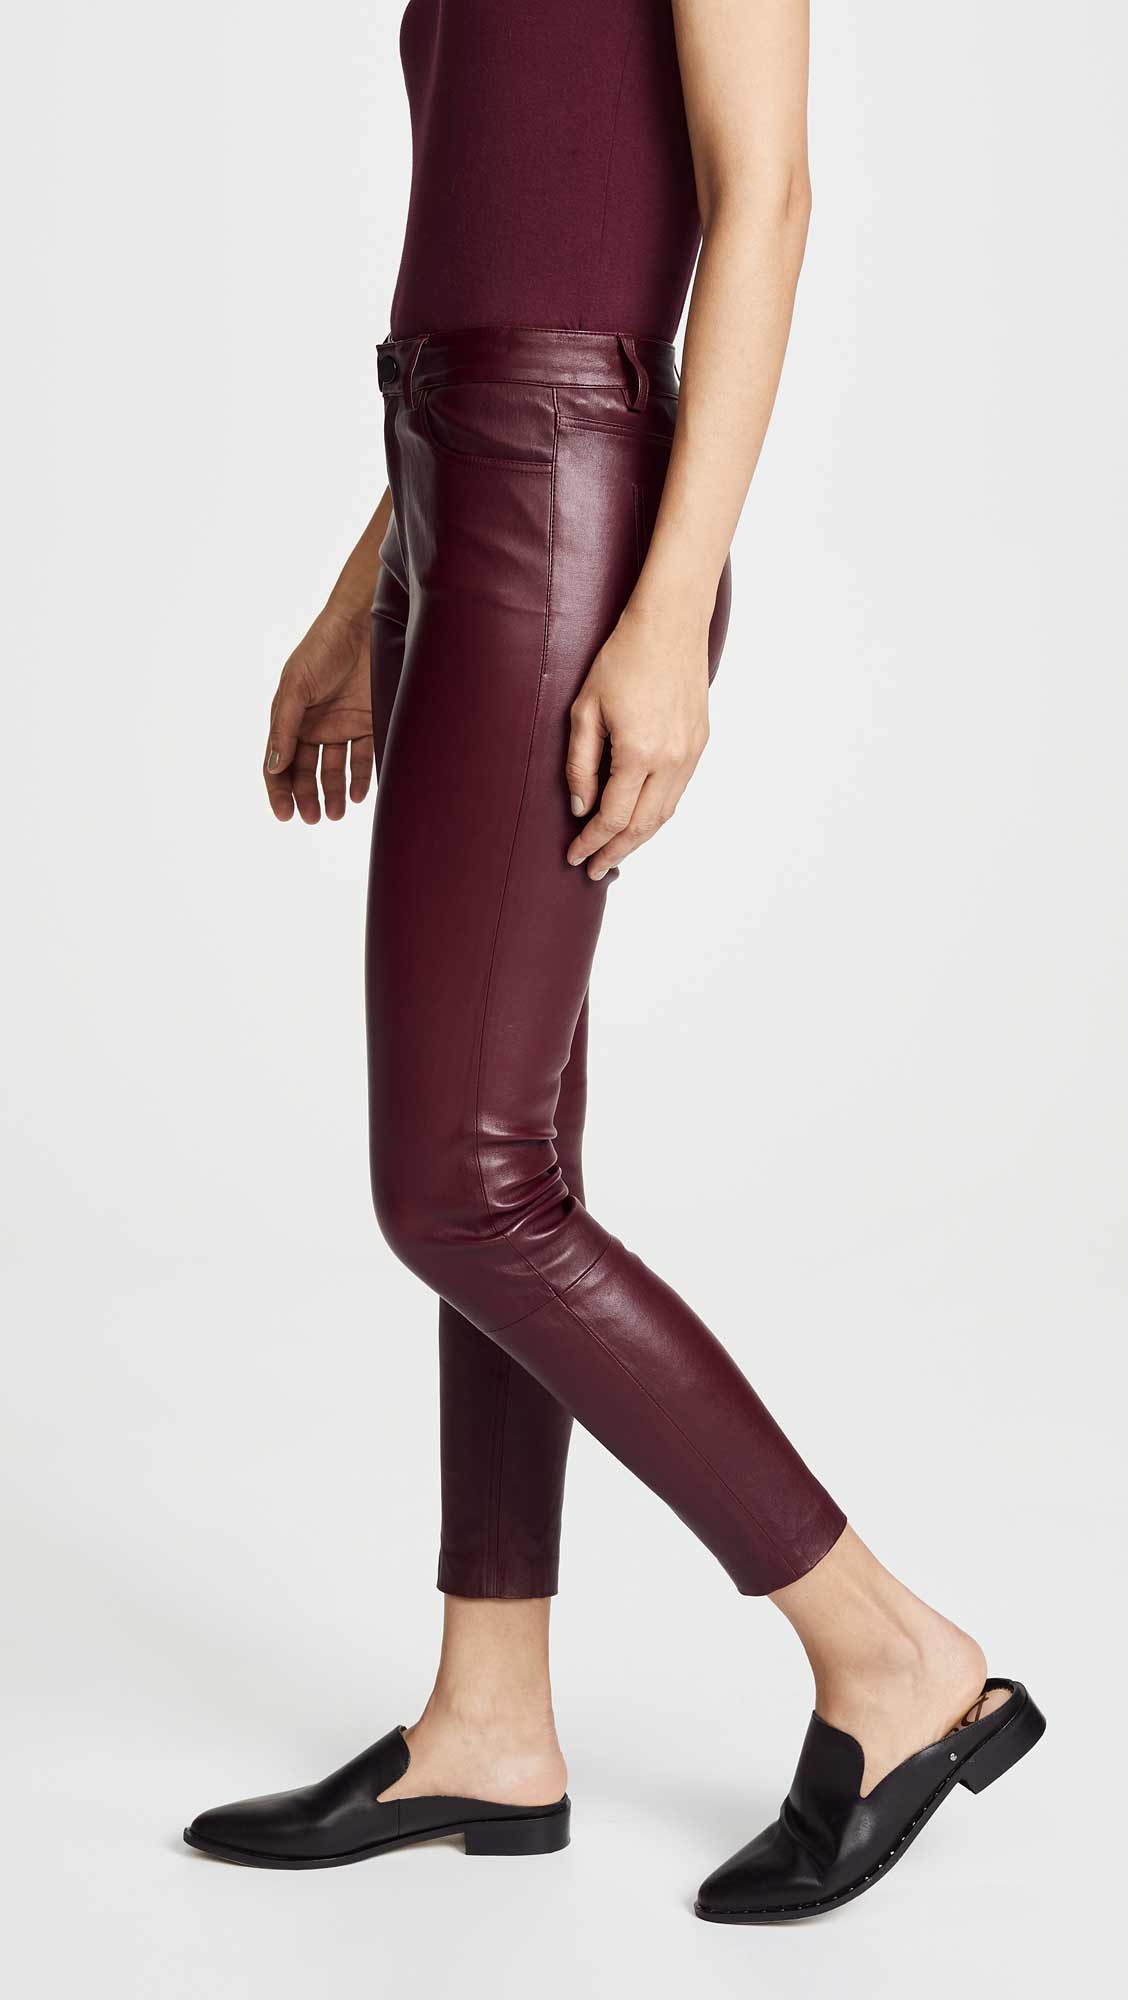 How to Wear Leather Pants burgundy leather culottes and tan sweater high  heels  Divine Style